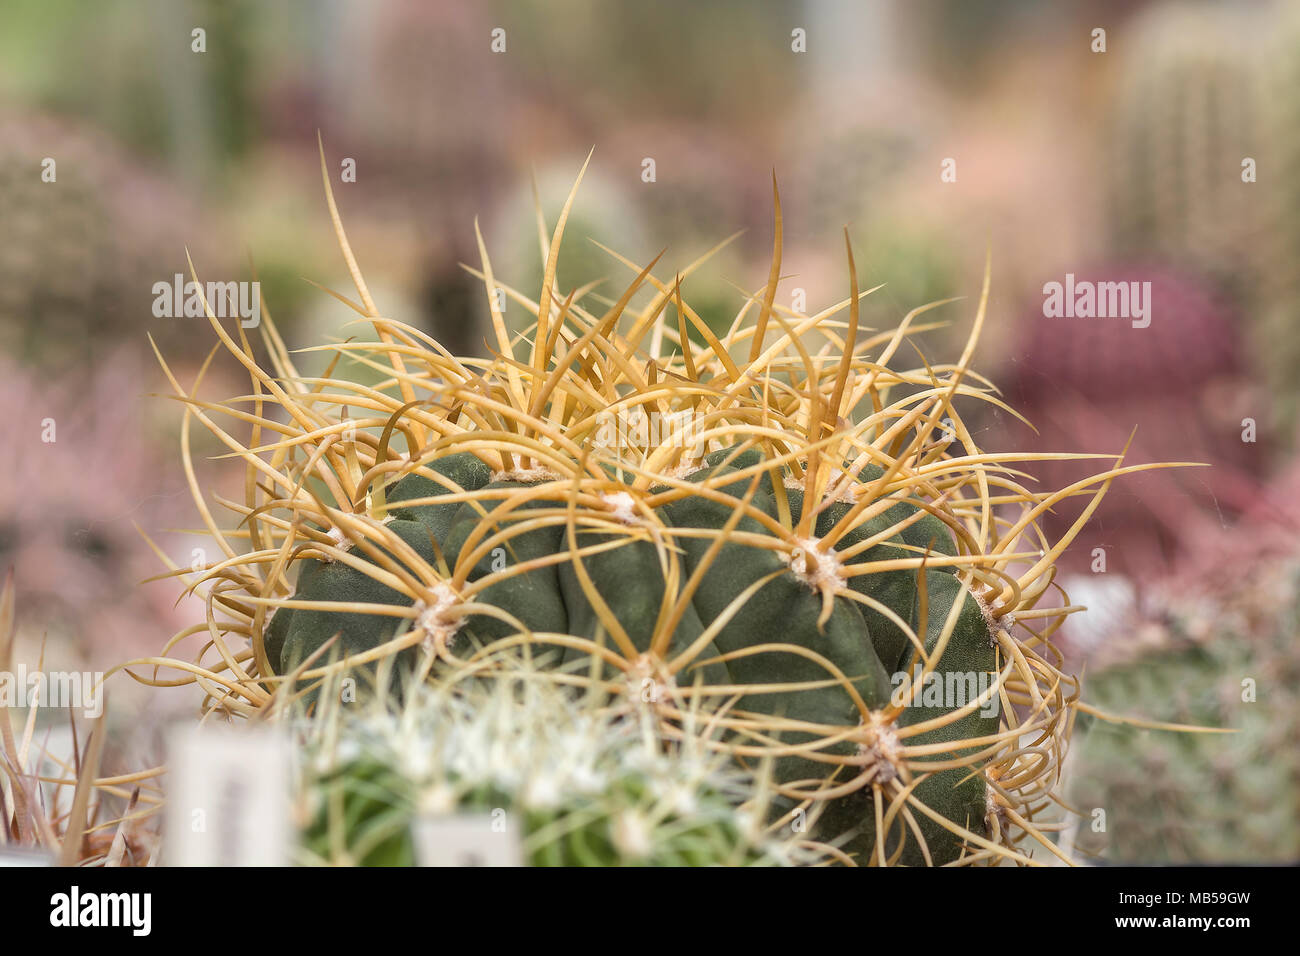 big spine of a cactus denmoza against blurry background Stock Photo